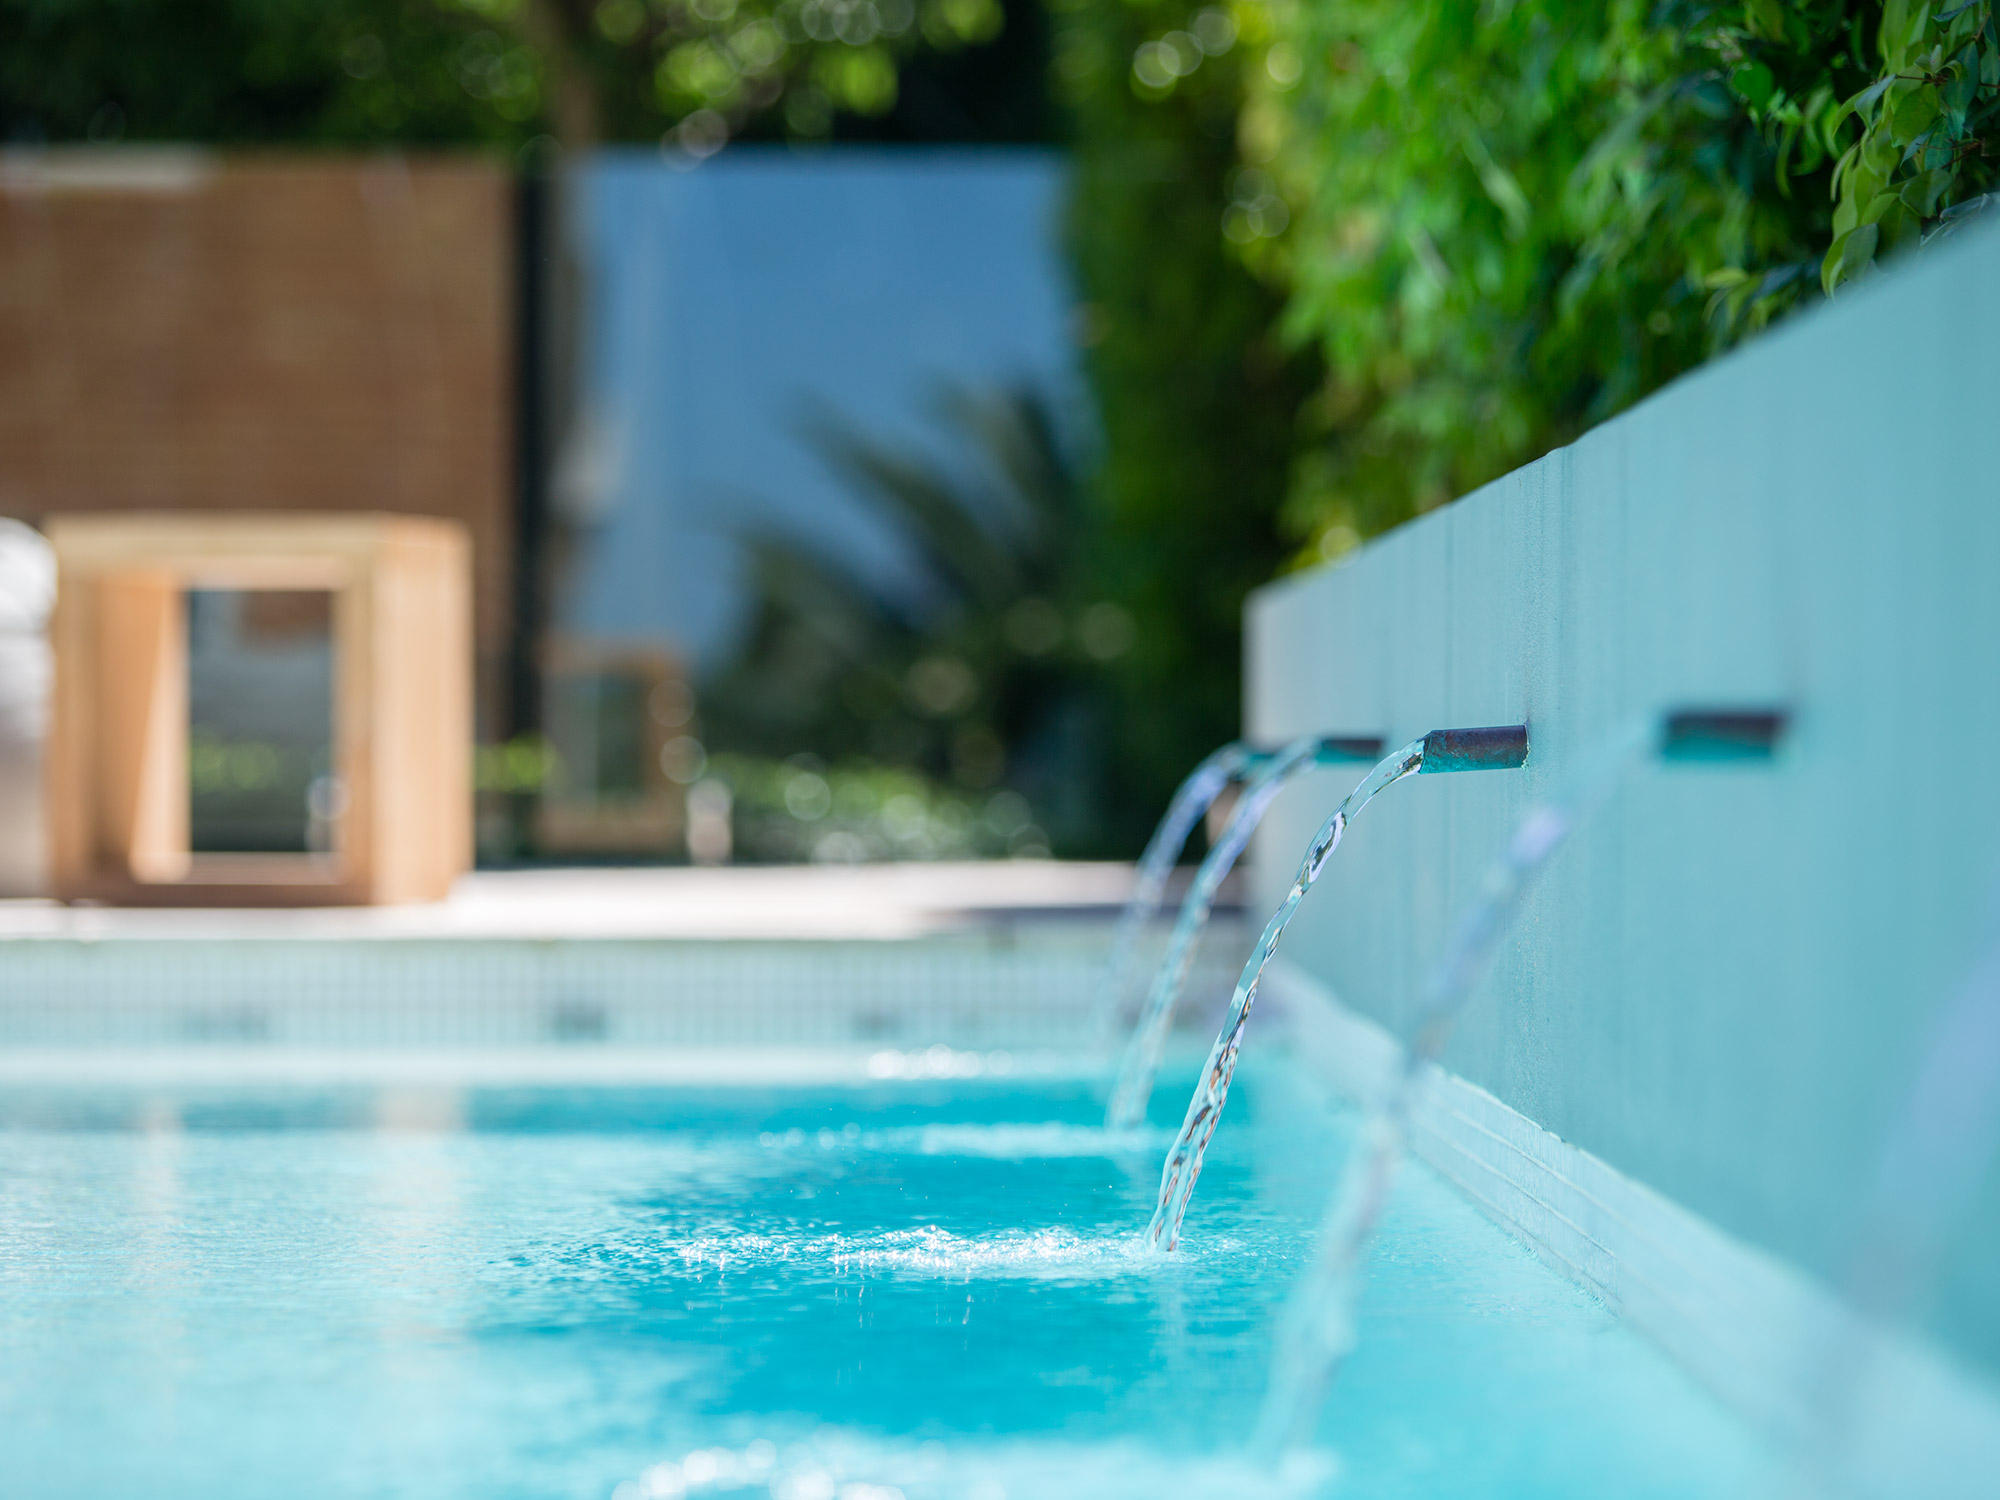 New trends making a splash – The ‘smart’ pool.